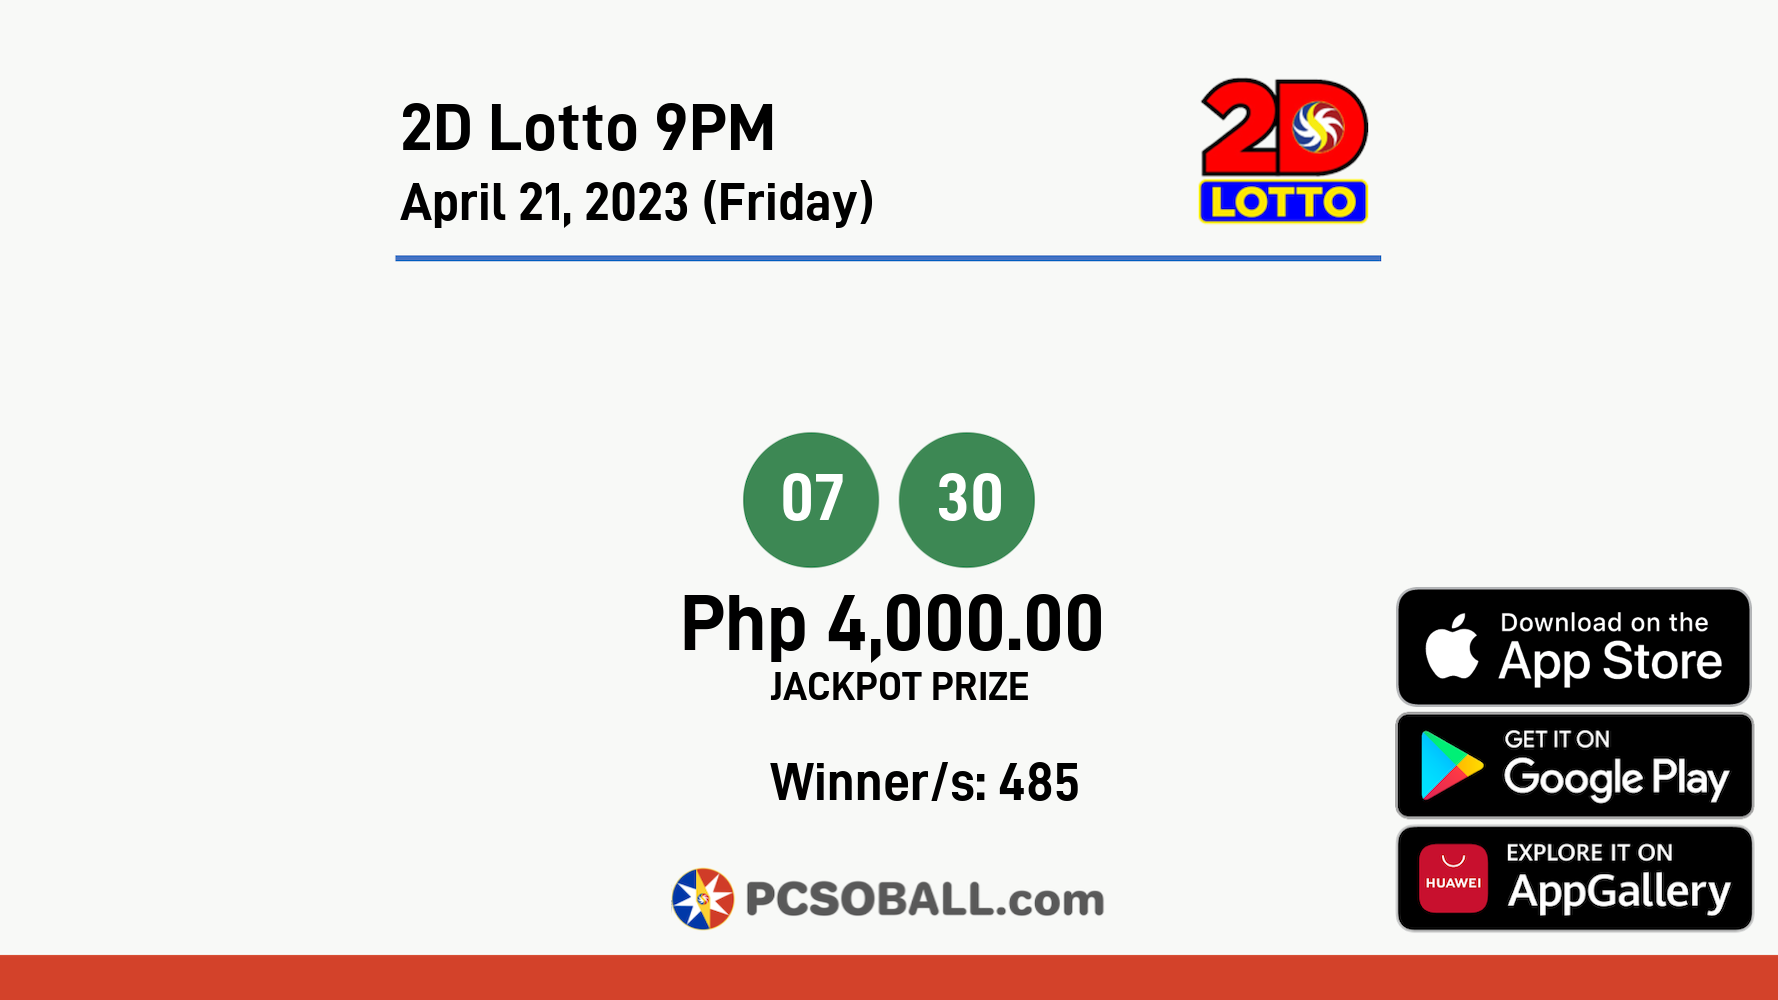 2D Lotto 9PM April 21, 2023 (Friday) Result